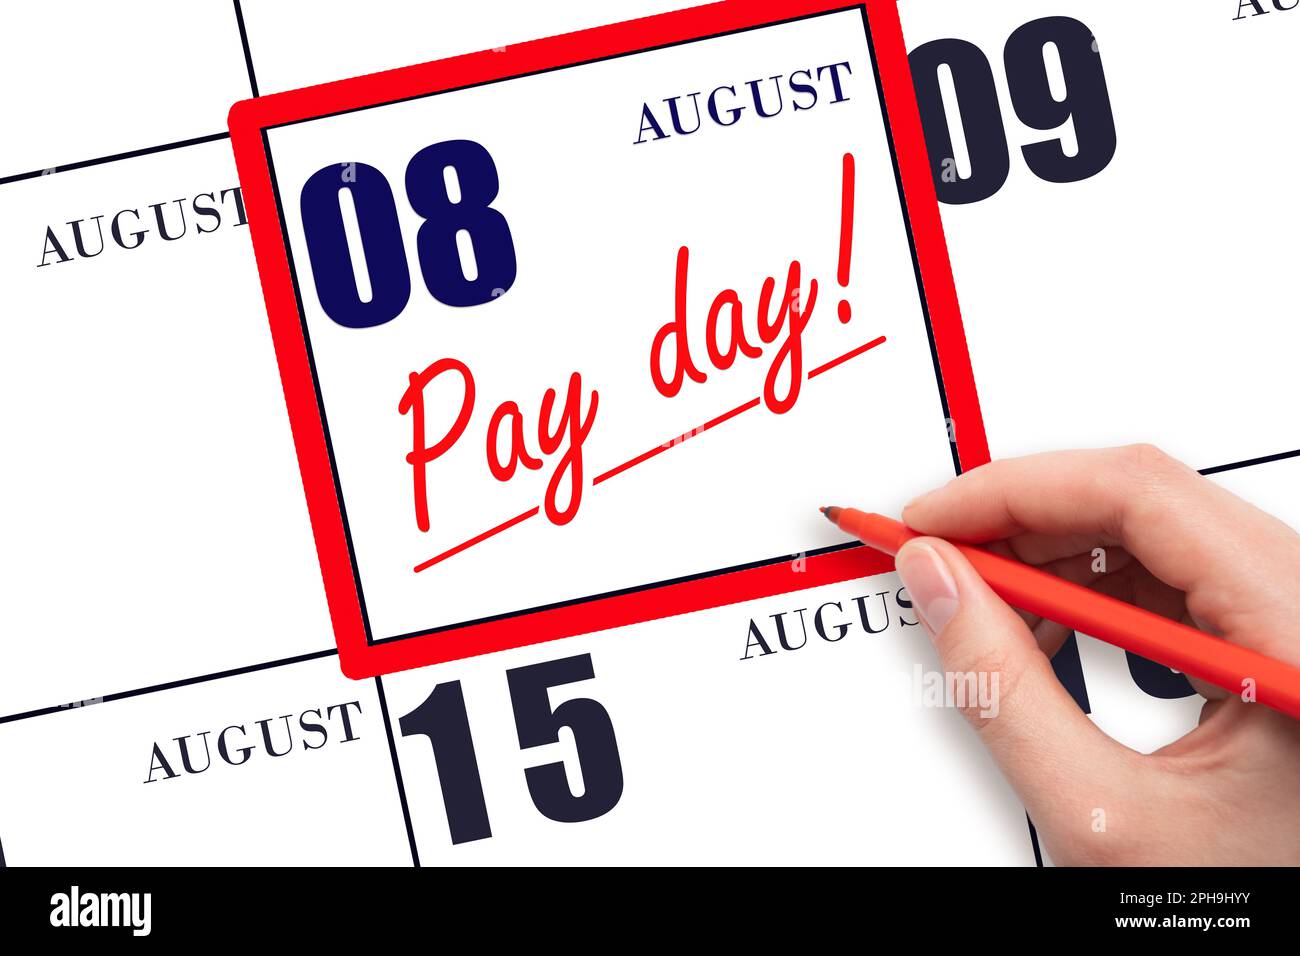 8th day of August. Hand writing text PAY DATE on calendar date August 8 and underline it. Payment due date. Reminder concept of payment. Summer month, Stock Photo